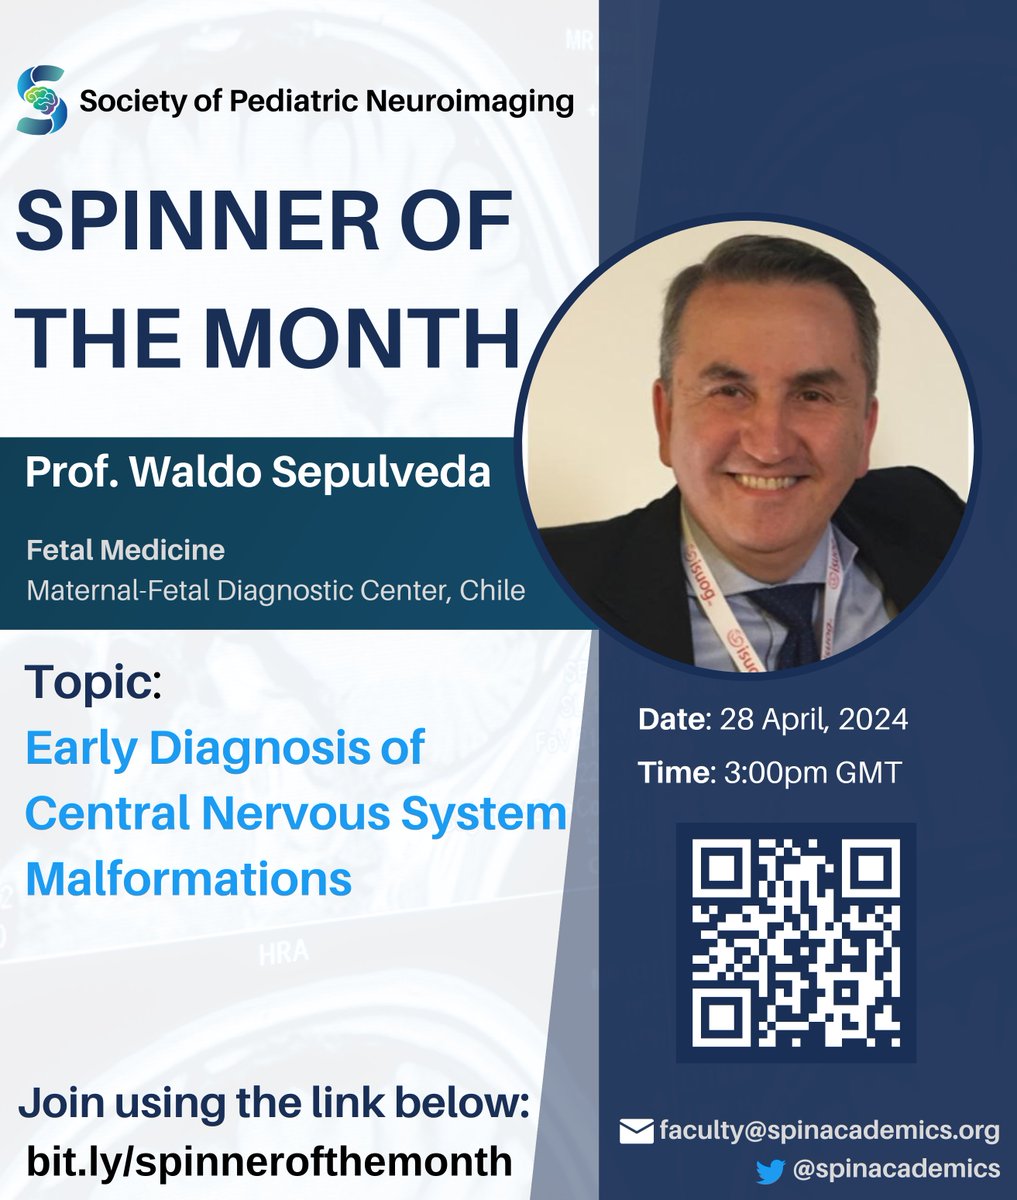 🎉 Excited to announce our Spinner of the Month for April: Prof. Waldo Sepulveda! 📷 Join us for his talk on 'Early Diagnosis of Central Nervous System Malformations' 📷 #Neuroradiology #FetalMedicine